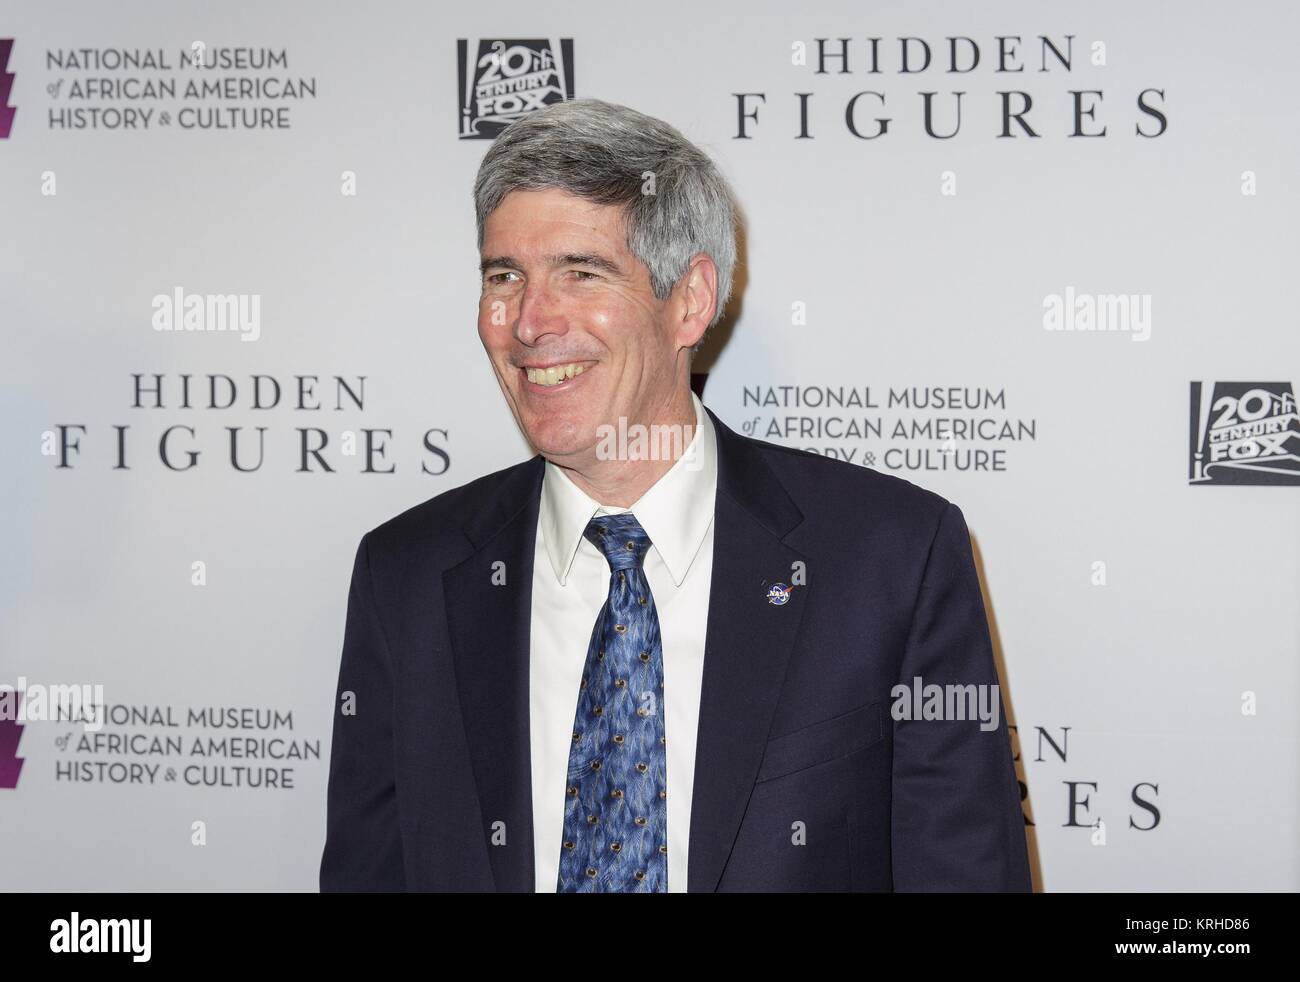 NASA Chief Historian Bill Barry walks the red carpet during a screening of the film Hidden Figures at the Smithsonian National Museum of African American History and Culture December 14, 2016 in Washington, DC. The film is based on the lives of three African-American mathematicians who worked for NASA during the John Glenn Friendship 7 mission in 1962. Stock Photo